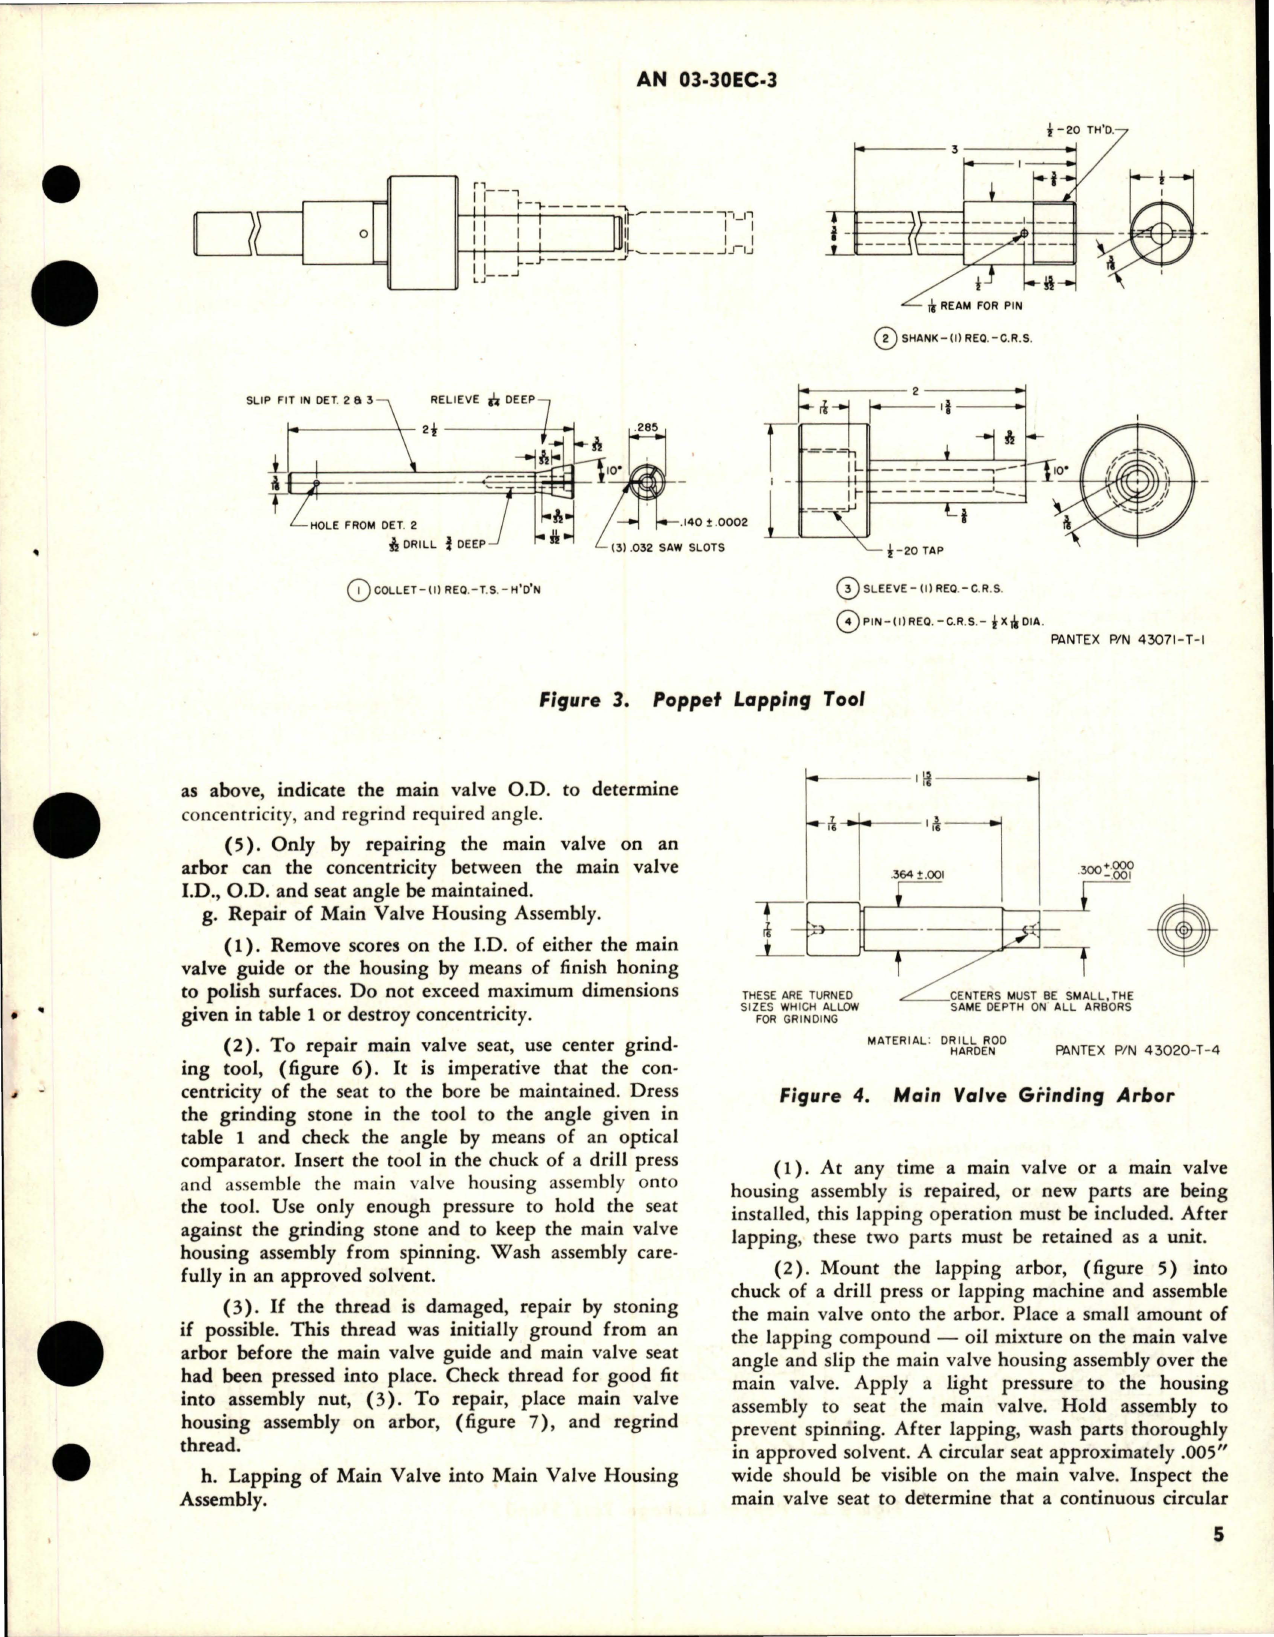 Sample page 5 from AirCorps Library document: Overhaul Instructions with Parts for Hydraulic Pressure Relief Valve - HPLV-A0